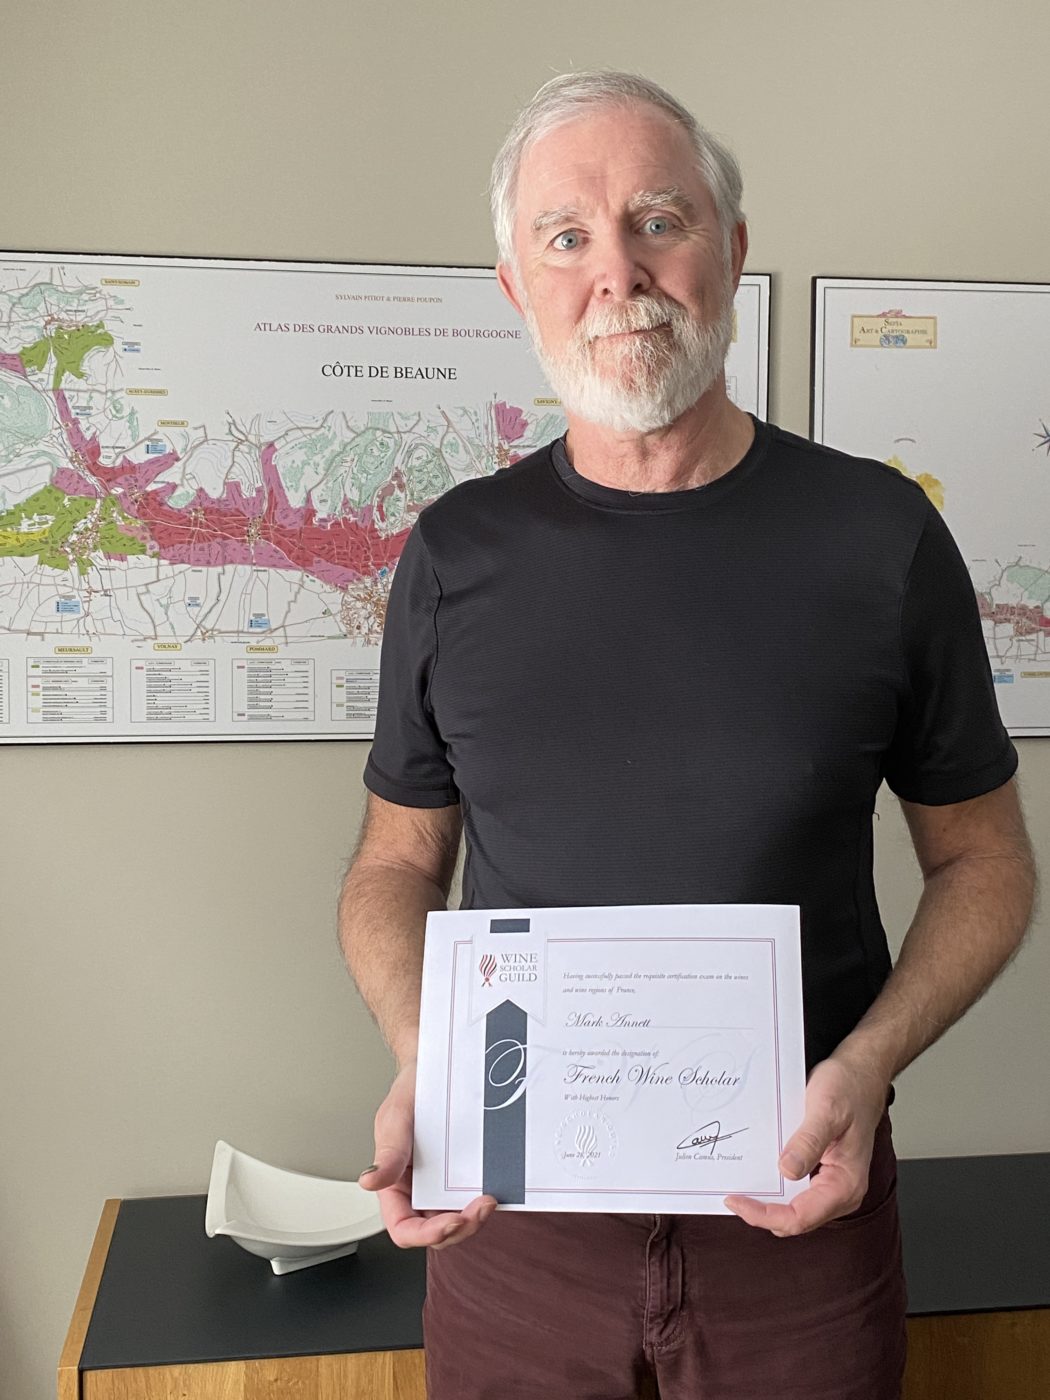 A man with a white beard and white hair wearing a black t-shirt while holding up a French Wine Scholar certificate.